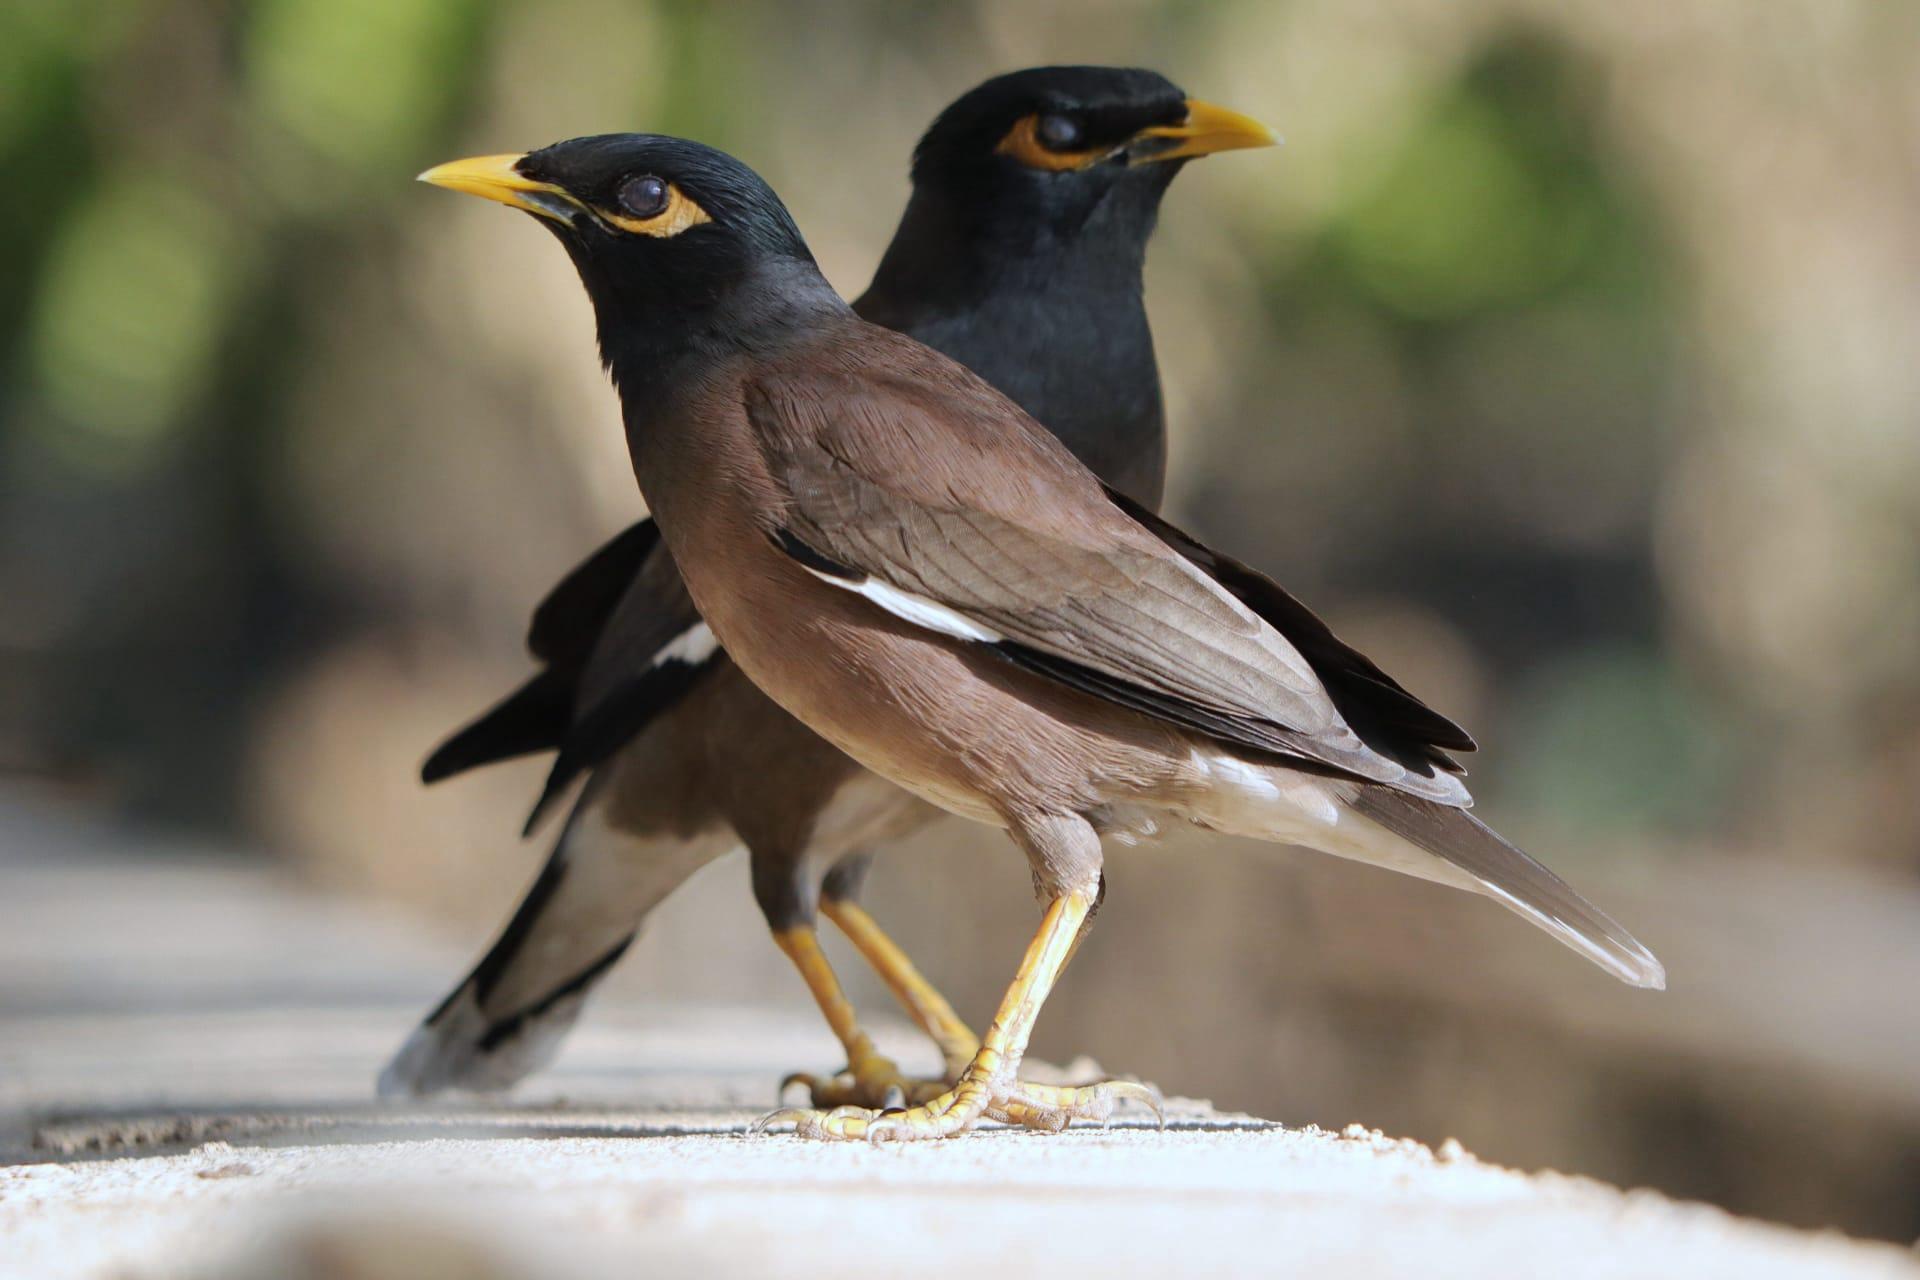 Myna pictures